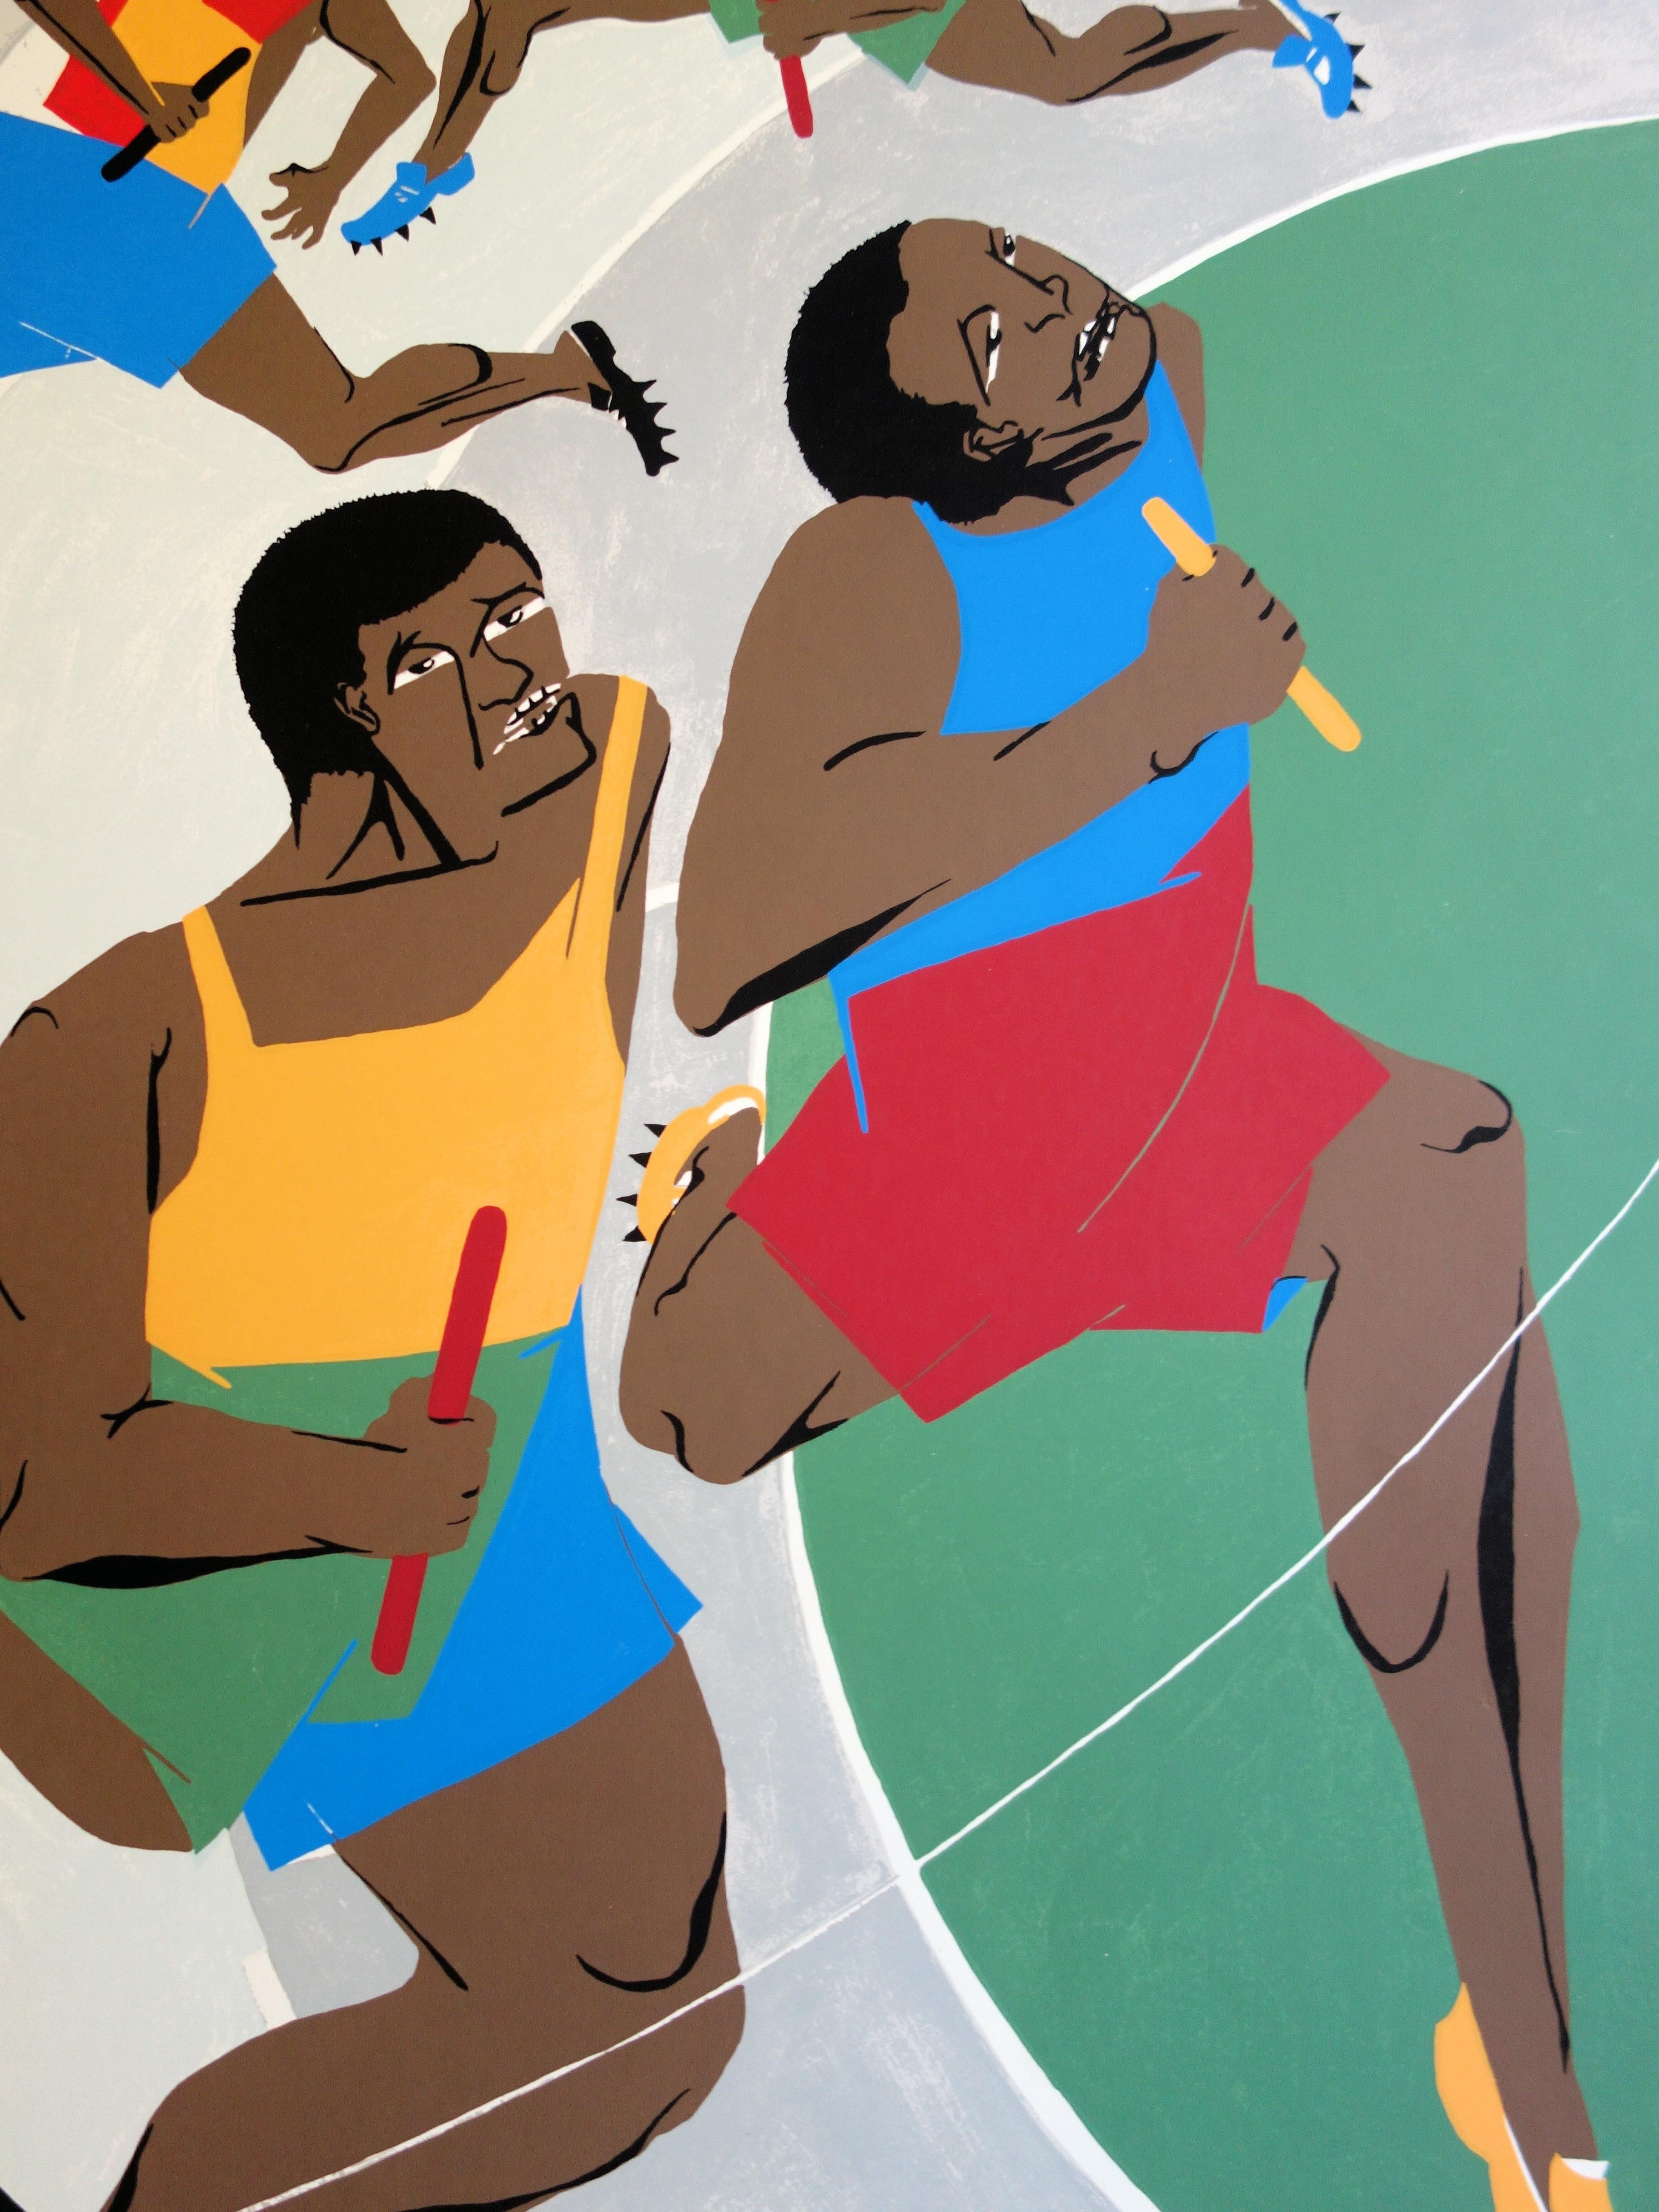 Jacob LAWRENCE
The Relay Race : Passing the Baton

Lithograph
Signature printed in the plate
On heavy paper 101 x 64 cm (c. 40 x 26 inch)
Made for the Olympic Games in Munich, 1972

Very good condition, light defects at the edge of the sheet